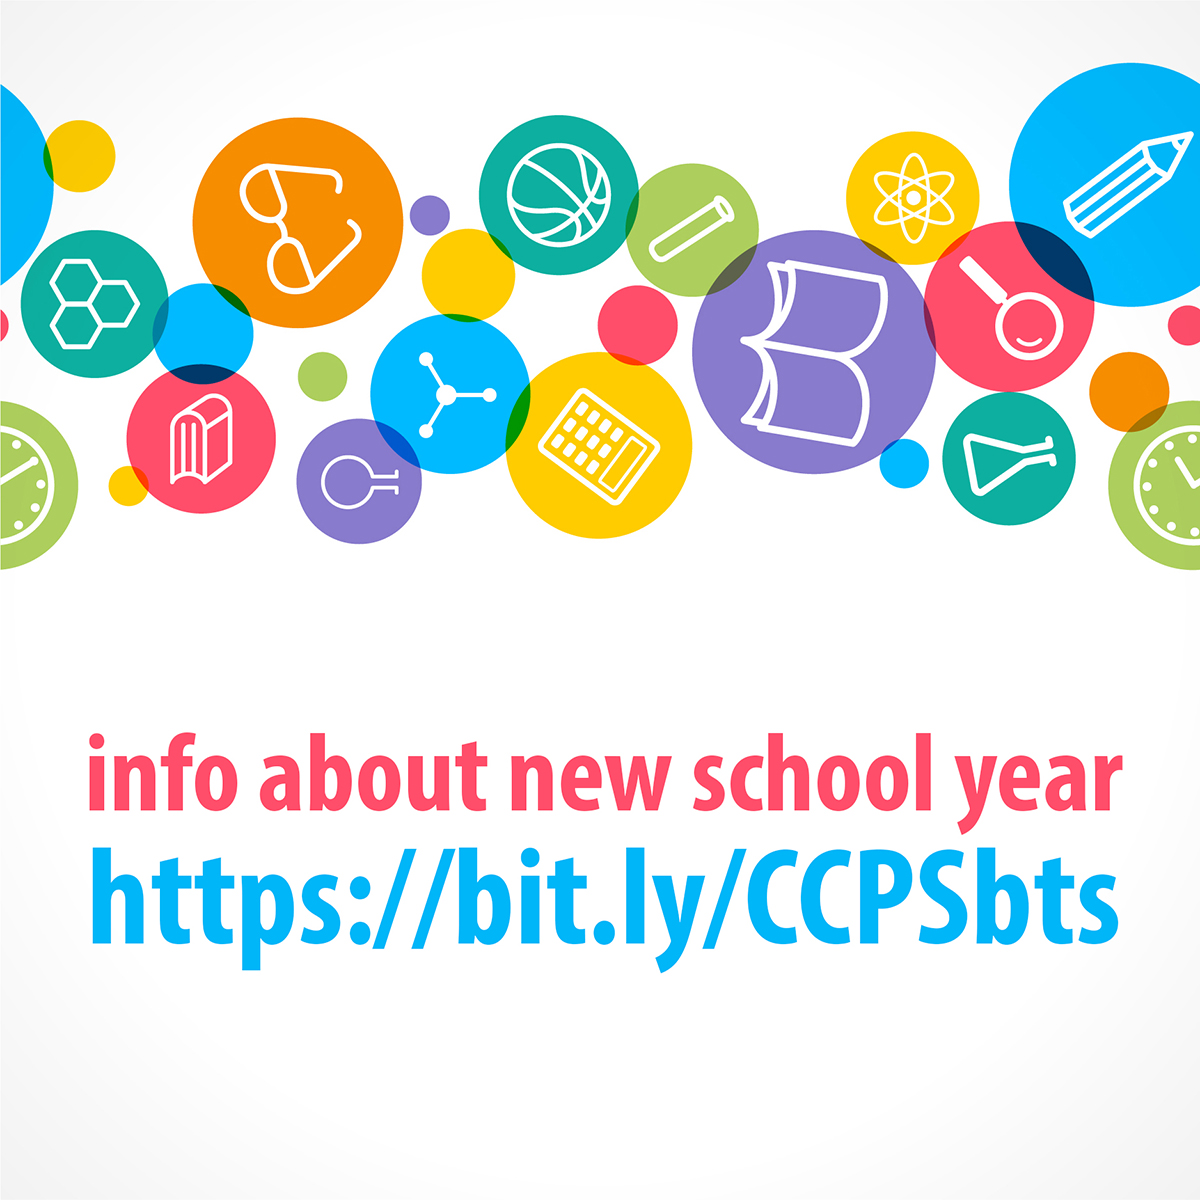 #oneCCPS families can find back-to-school info about buses, meals and much more at bit.ly/CCPSbts.